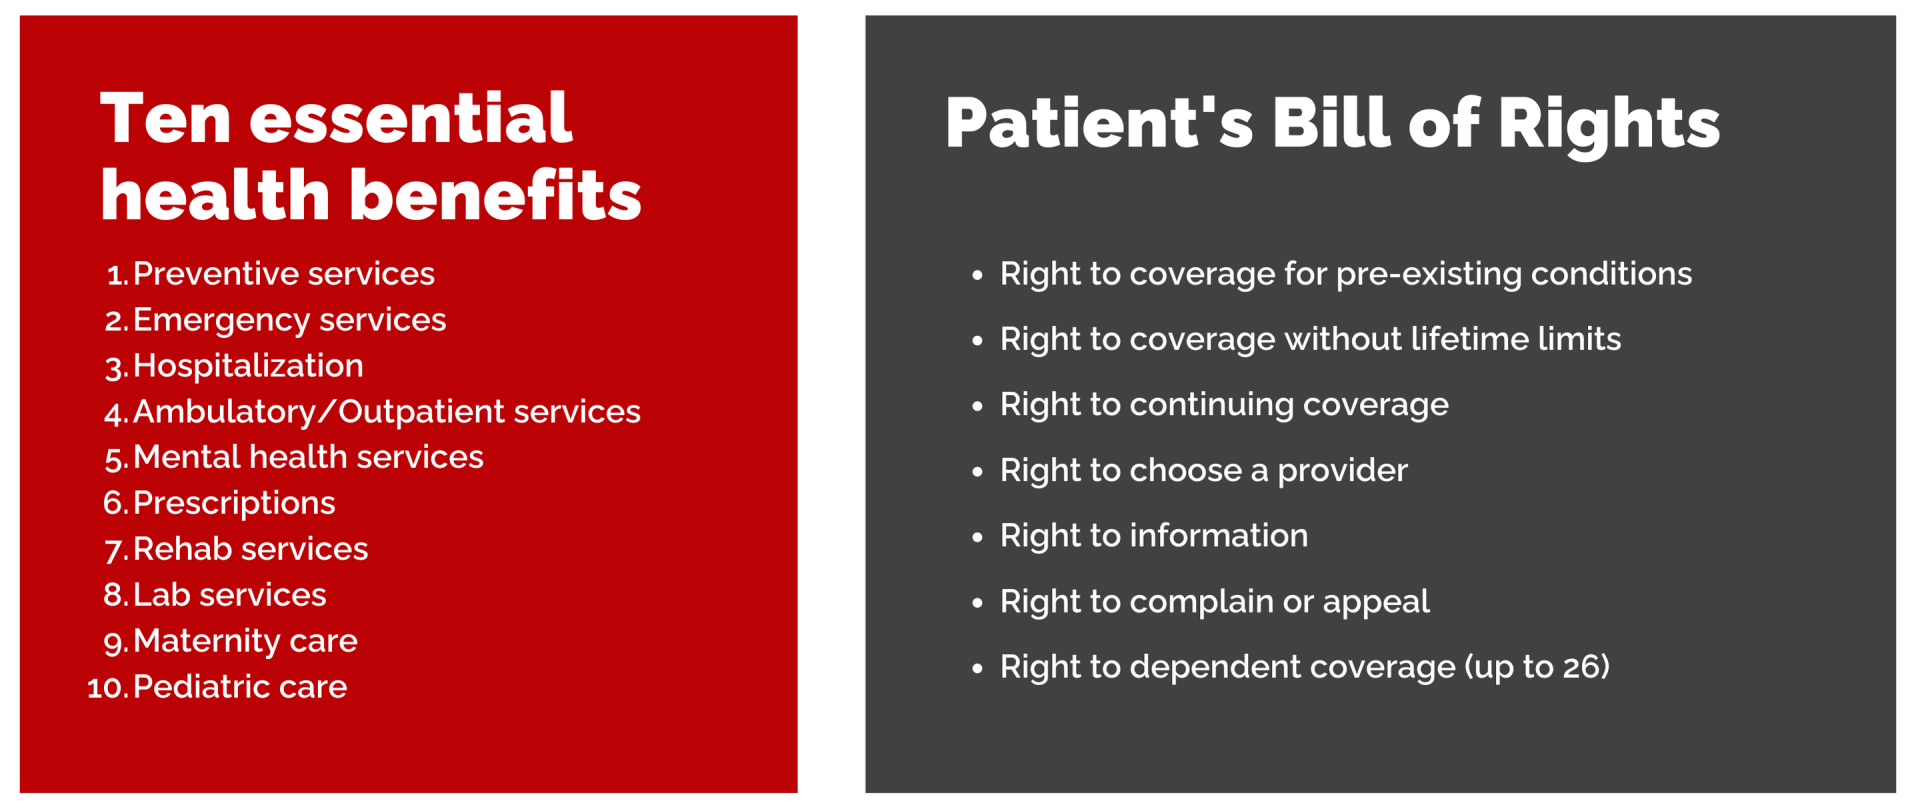 a list of ten essential health benefits next to a list of patient 's bill of rights